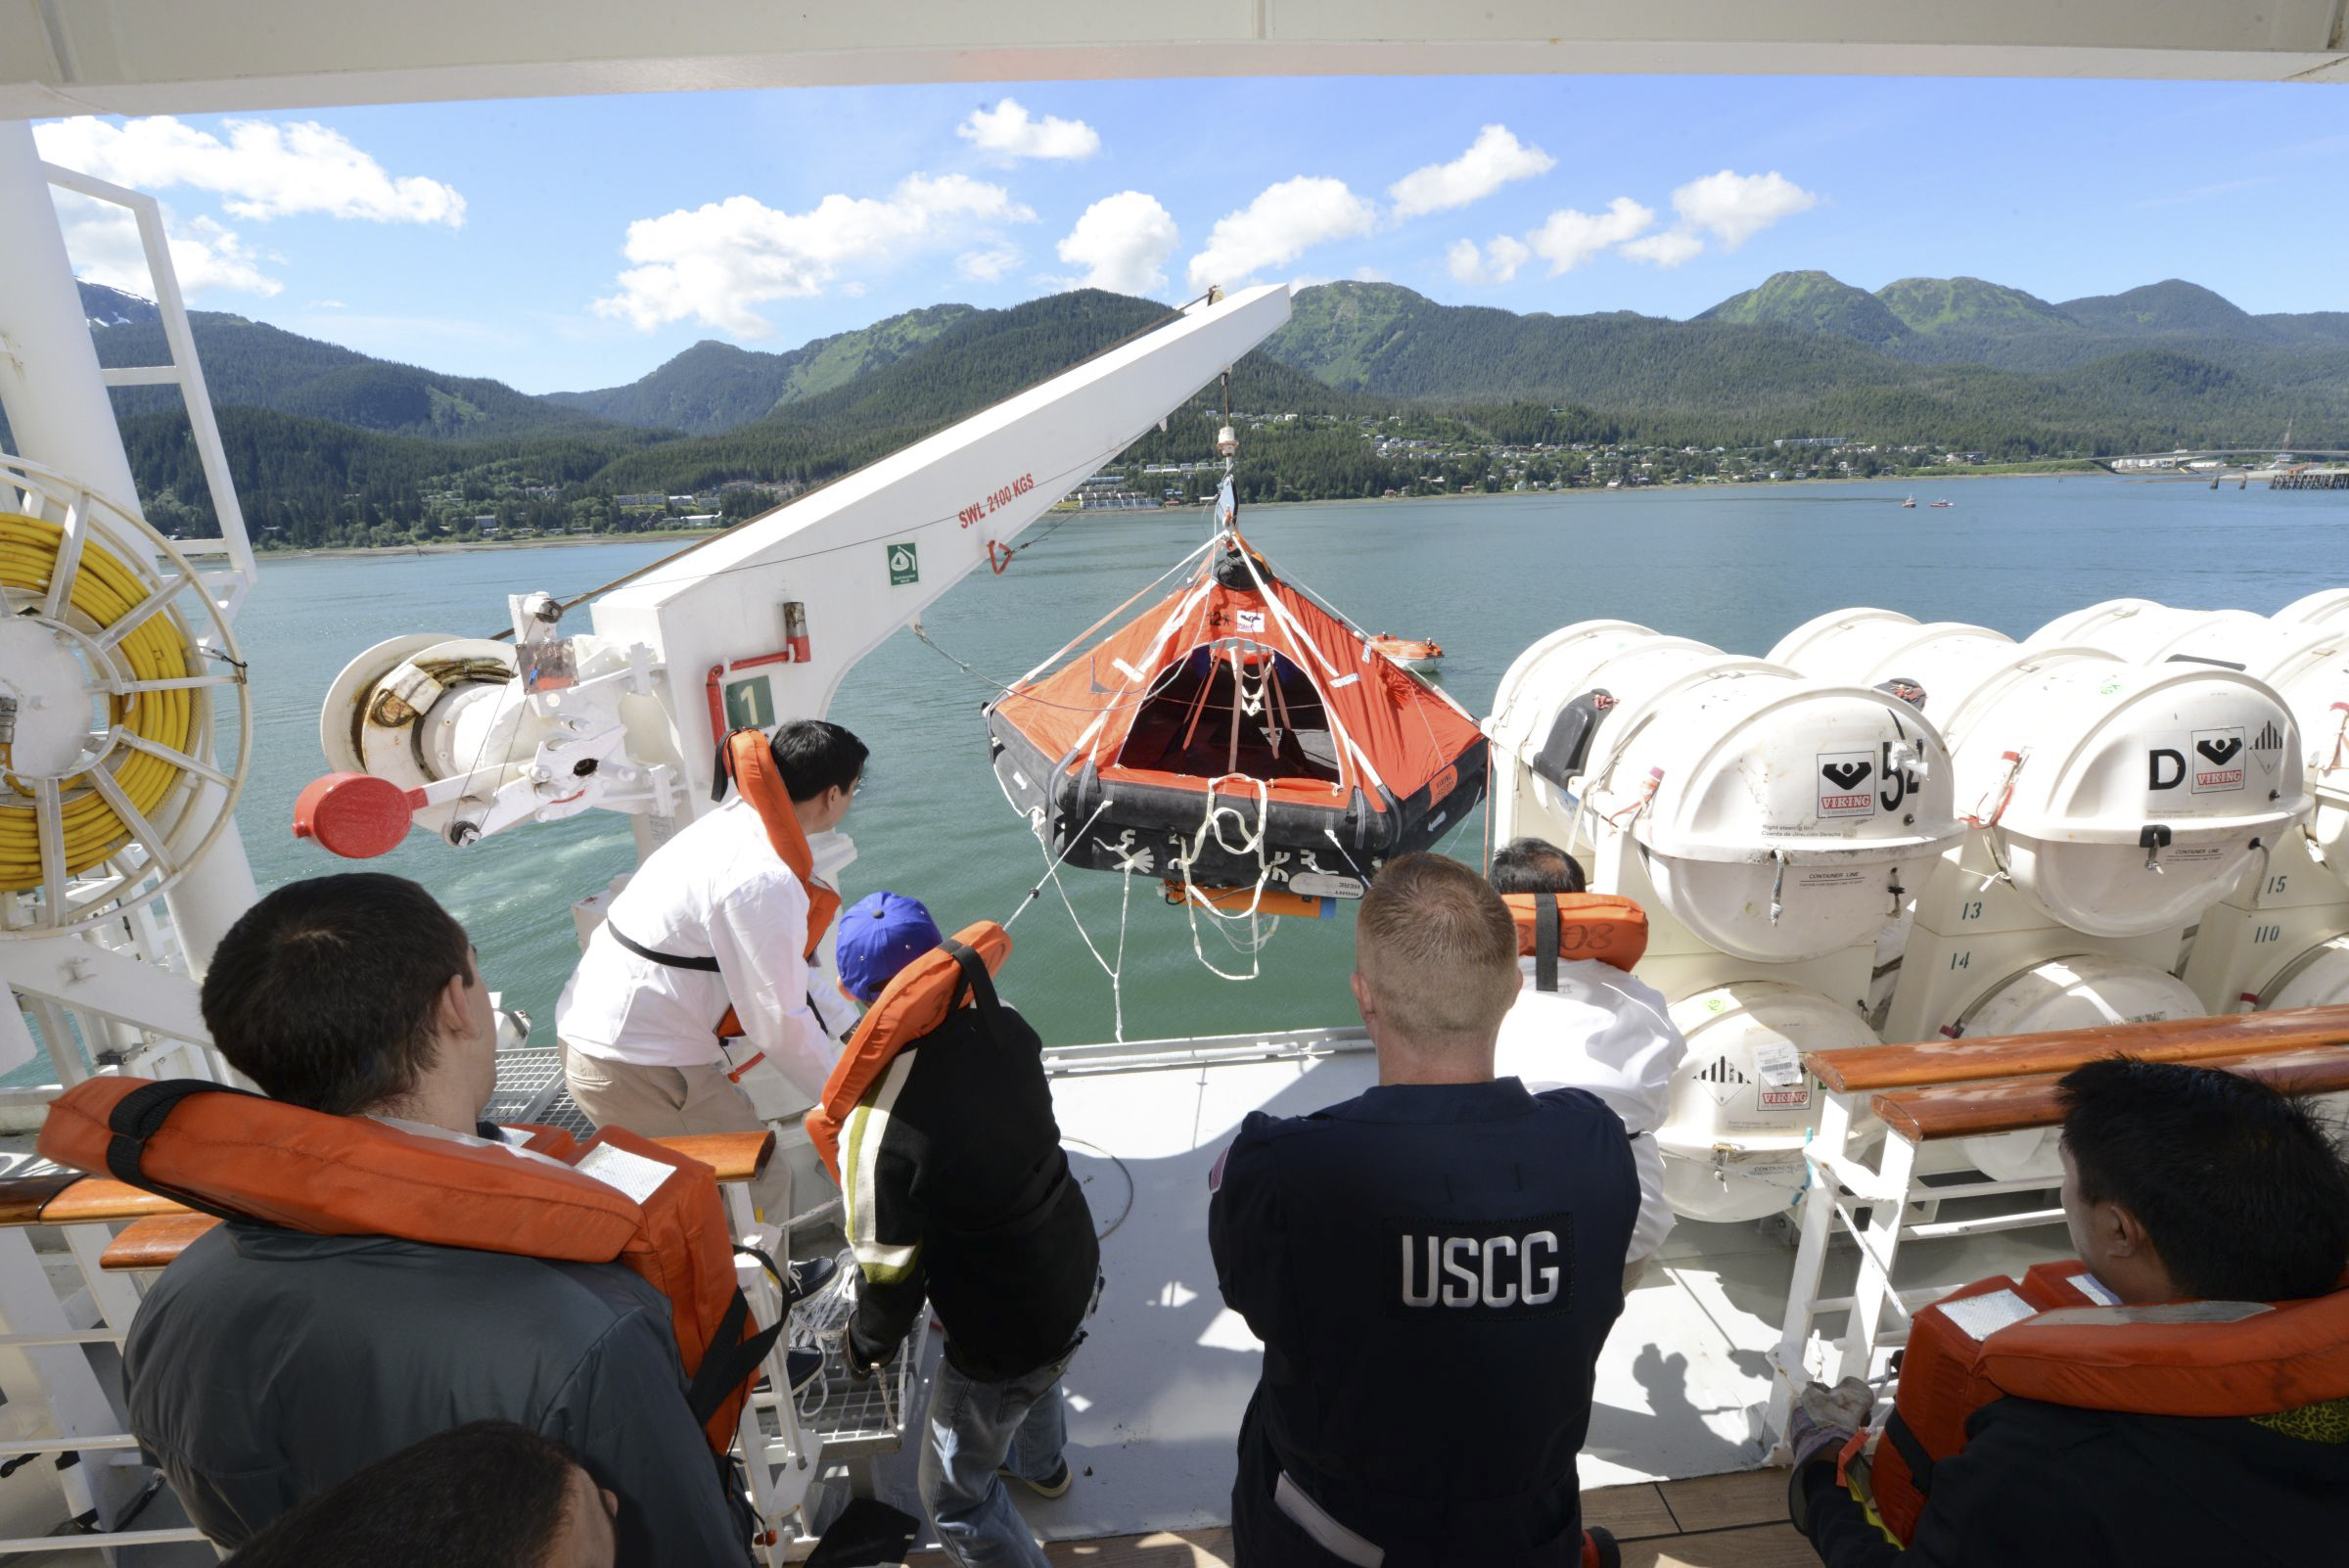 Lt. Ryan Butler, center back to camera, of the U.S. Coast Guard observes crew members of the Crystal Serenity as they test a crane and life raft before a Northwest Passage cruise,  Juneau, Alaska, June 22, 2016. As global warming reduces the extent of sea ice in the Arctic, more ships will be plying waters farther north, which raises concerns about ship safety. (Petty Officer 2nd Class Jon-Paul Rios / U.S Coast Guard via The New York Times) 